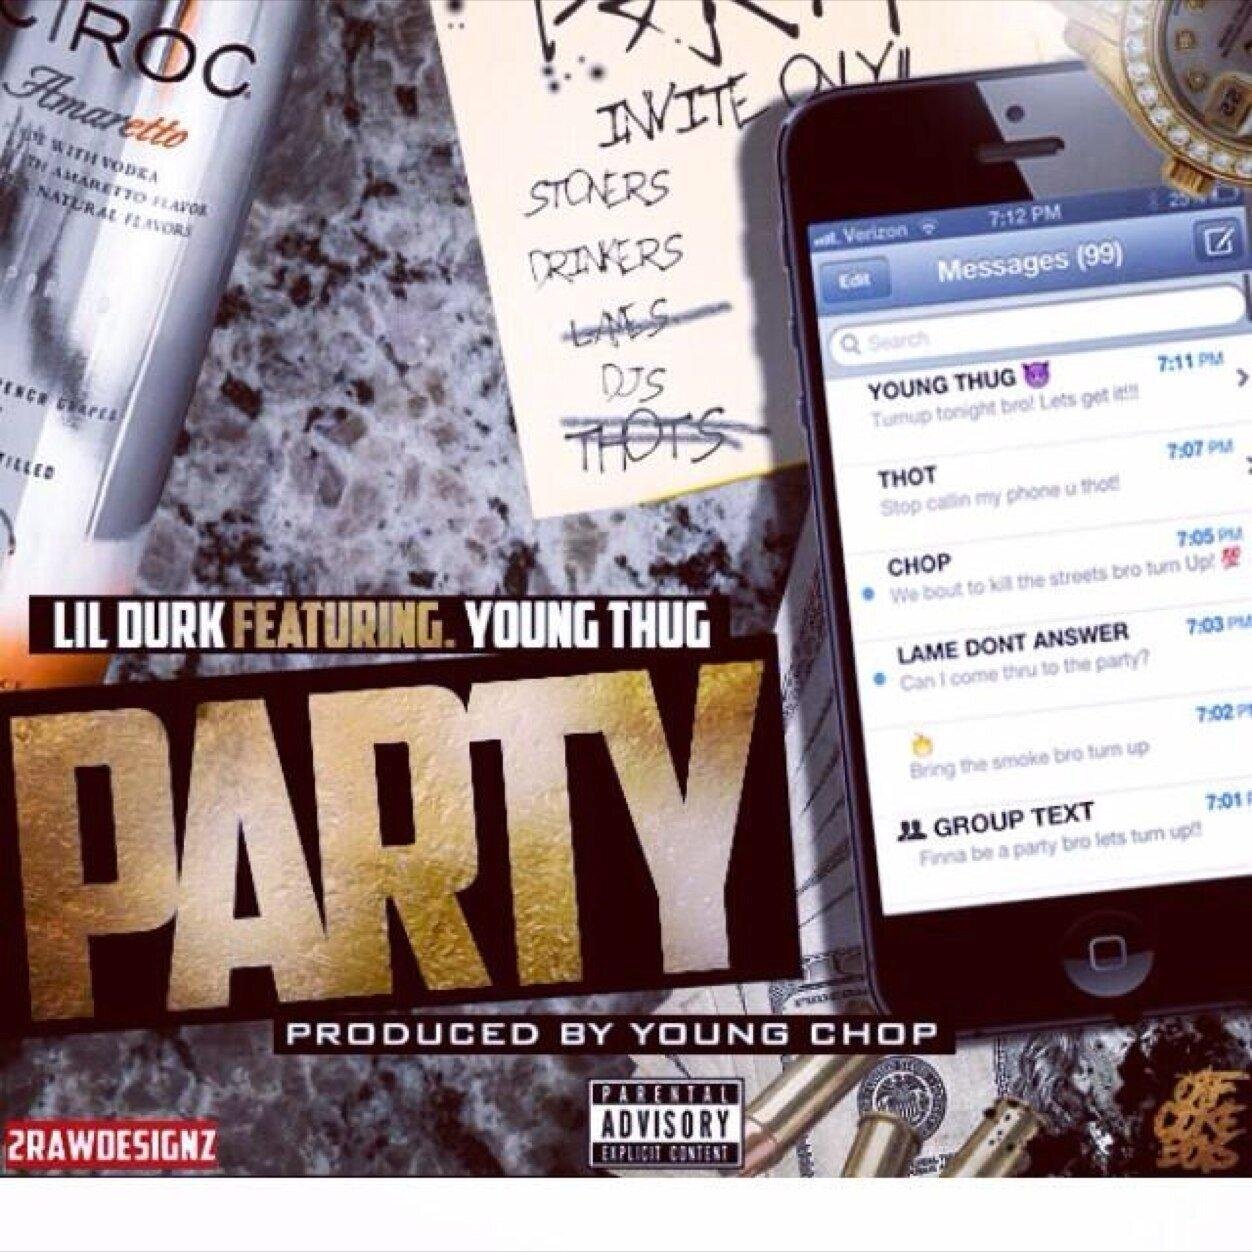 Def Jam Recording Artist. For features contact my mngr UMI 312 735 1113 or email me at Lildurkfeatures@GMAIL.COM